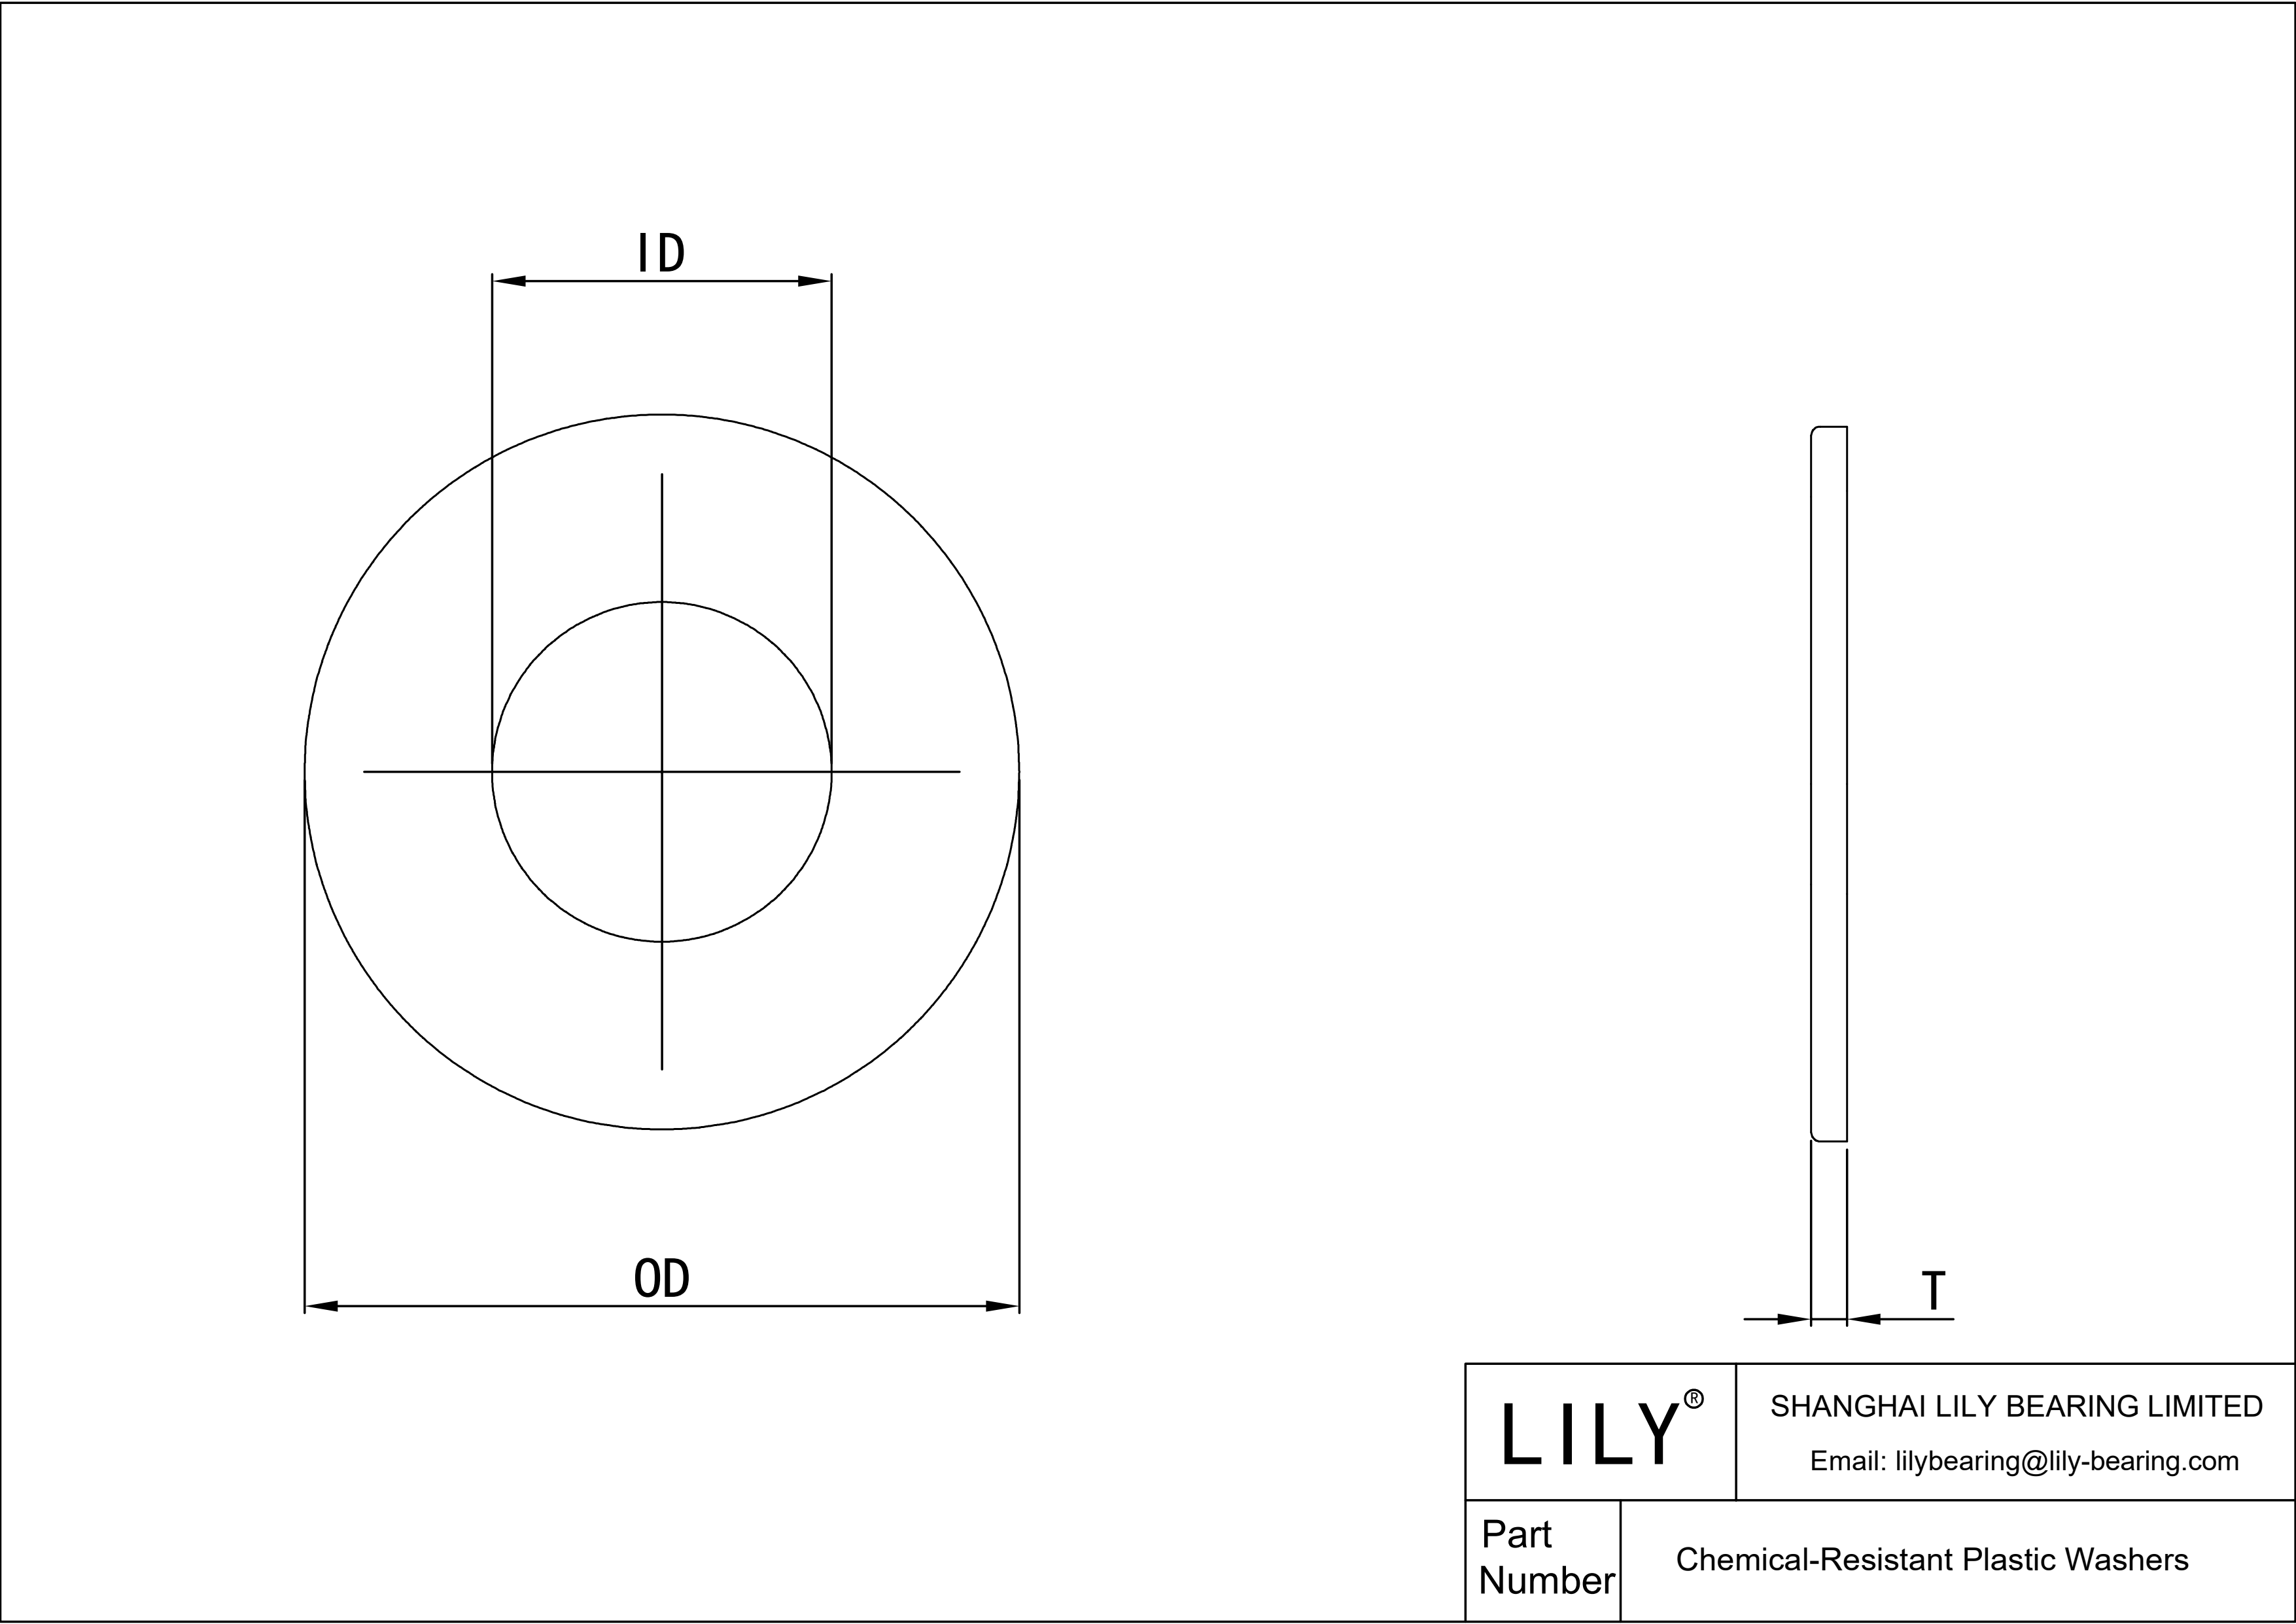 JFGDAACBG Chemical-Resistant Plastic Washers cad drawing